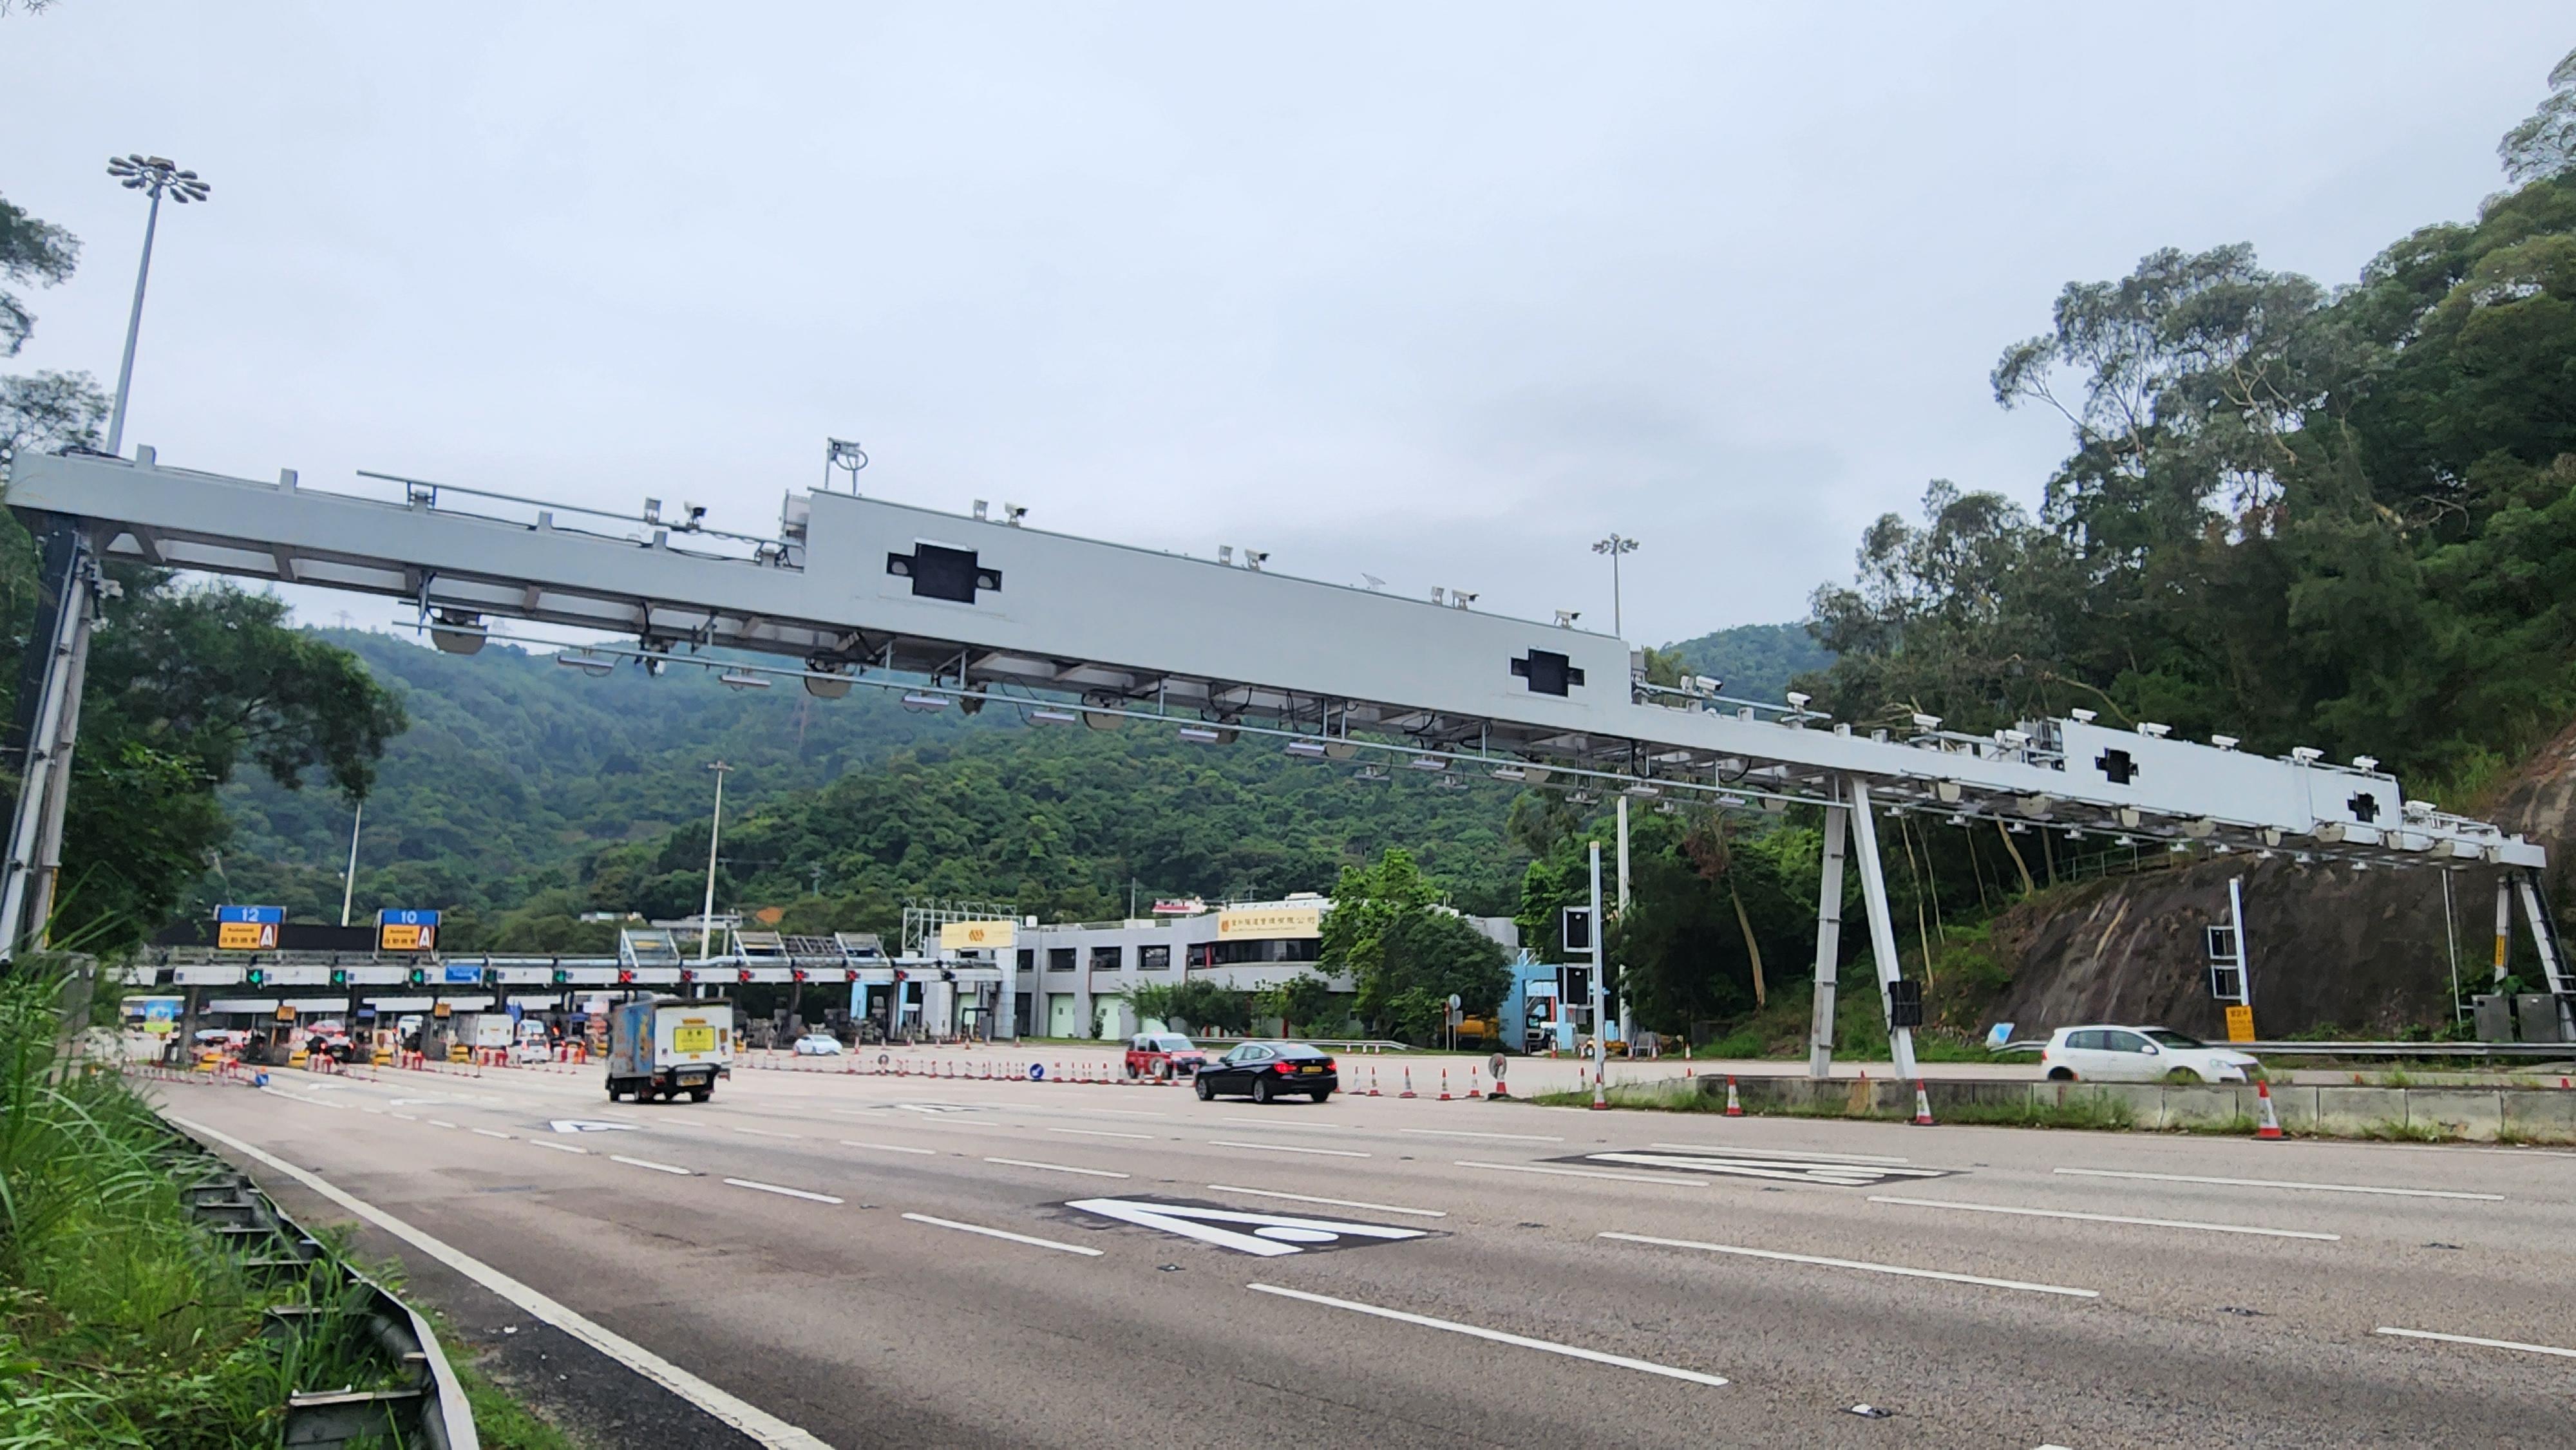 The Transport Department announced today (May 15) that Shing Mun Tunnels will implement the HKeToll from 5am on May 21. Motorists can drive through the toll plazas and pay tolls by the HKeToll, without having to stop or queue at toll booths for payment. Photo shows the HKeToll toll collection facilities (gantry) at the Tsuen Wan-bound Shing Mun Tunnels.